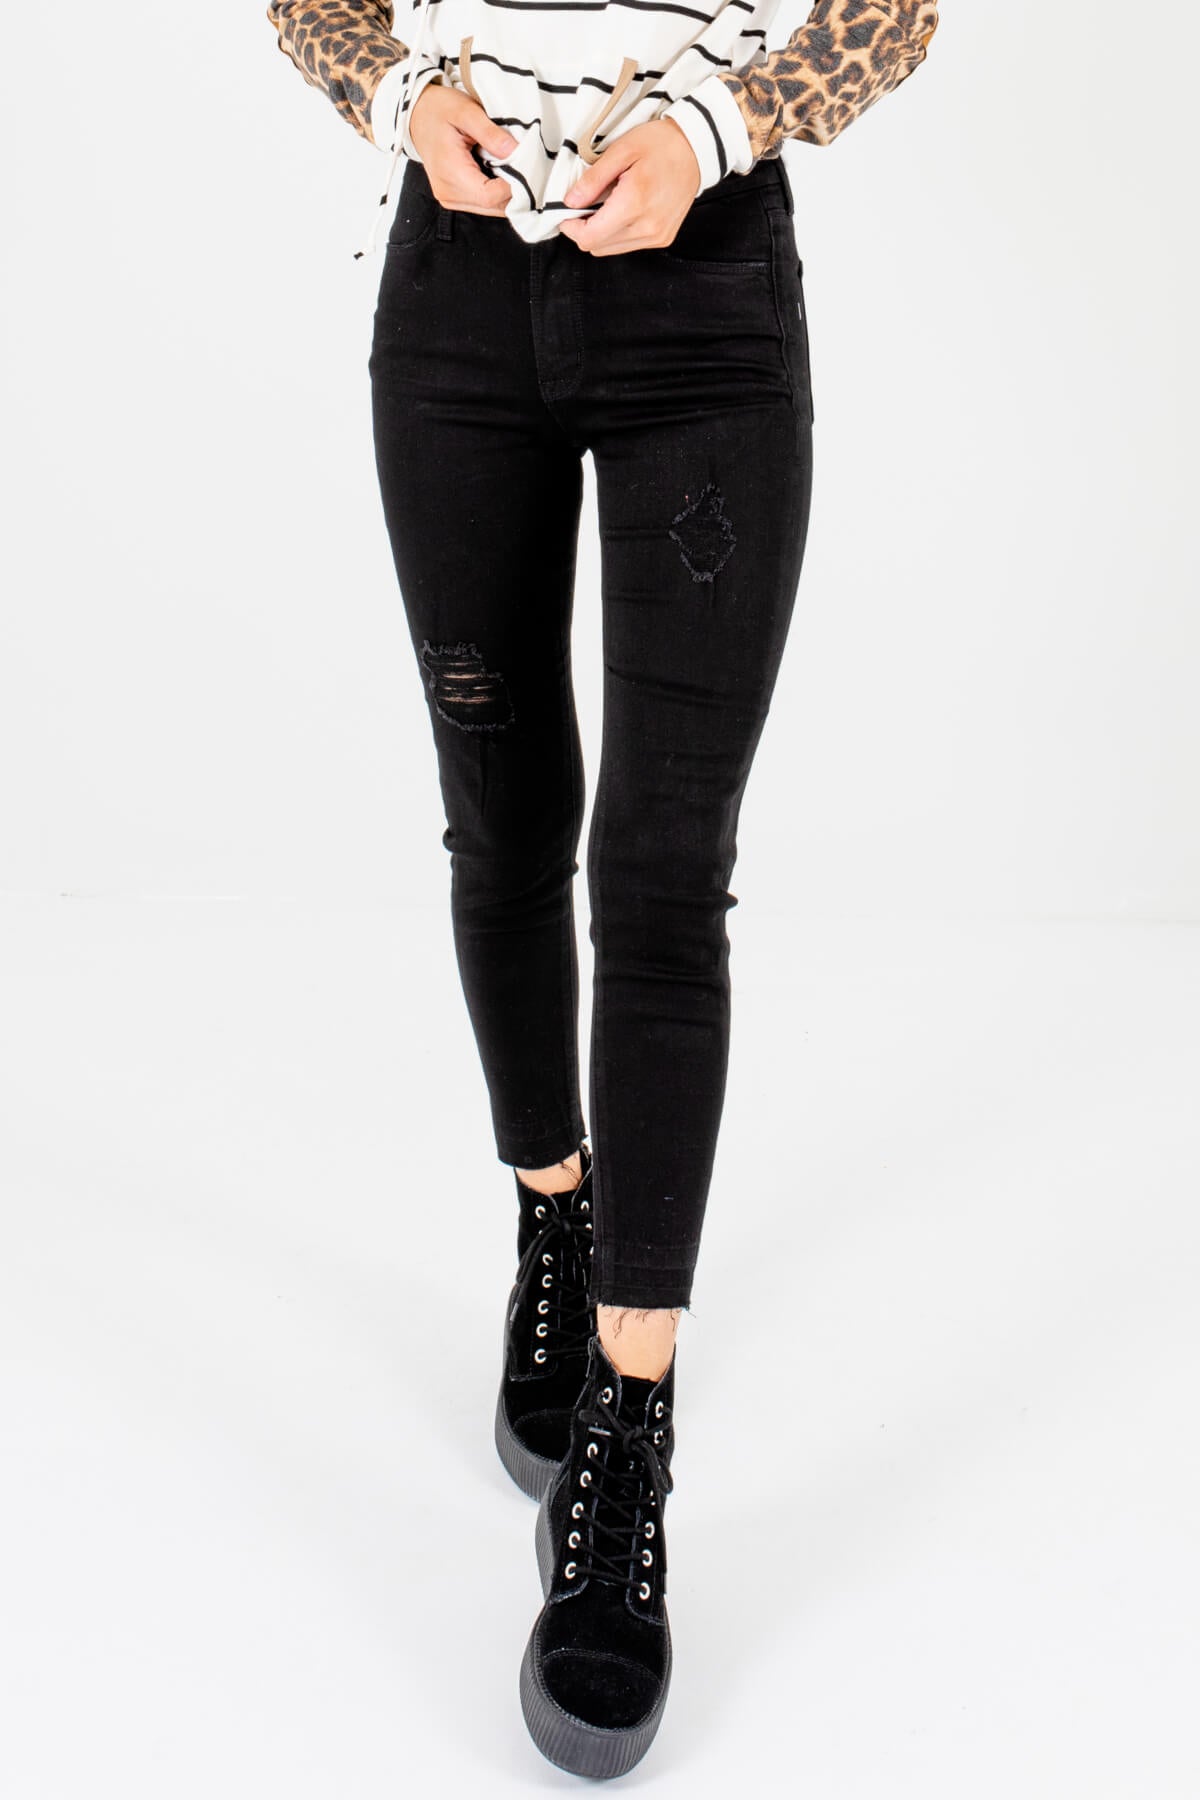 Women's Black Cute and Comfortable Boutique Skinny Jeans